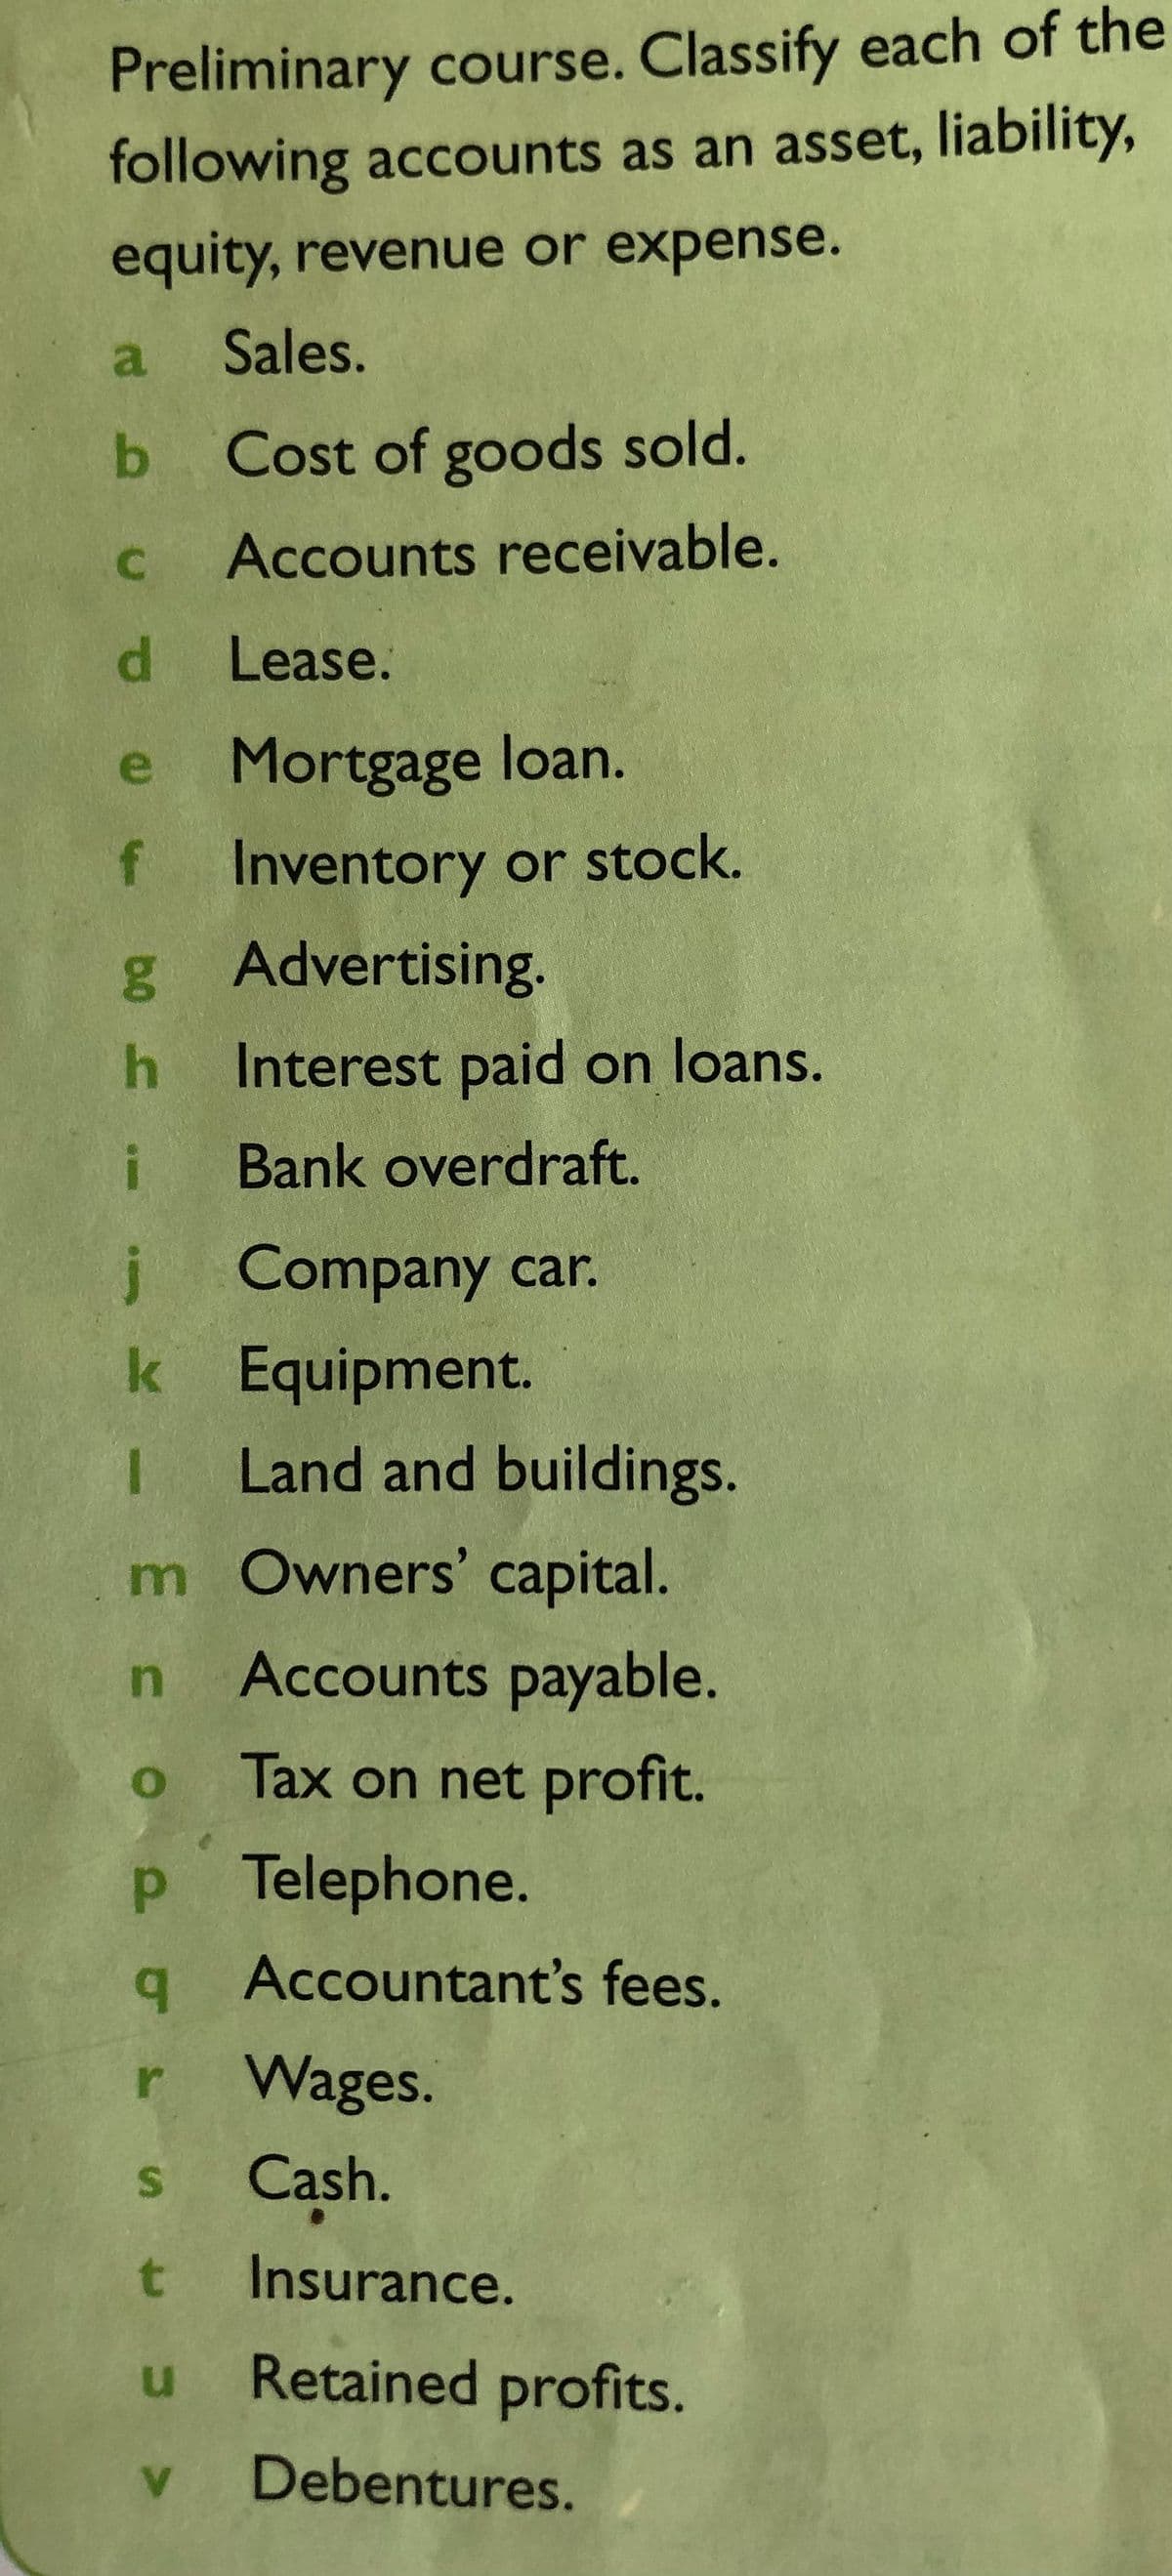 Preliminary course. Classify each of the
following accounts as an asset, liability,
equity, revenue or expense.
a Sales.
b Cost of goods sold.
Accounts receivable.
d Lease.
e Mortgage loan.
f Inventory or stock.
g Advertising.
h Interest paid on loans.
i
Bank overdraft.
j Company car.
k Equipment.
I Land and buildings.
m Owners' capital.
n Accounts payable.
Tax on net profit.
p Telephone.
q Accountant's fees.
Wages.
Cash.
t Insurance.
Retained profits.
v Debentures.
